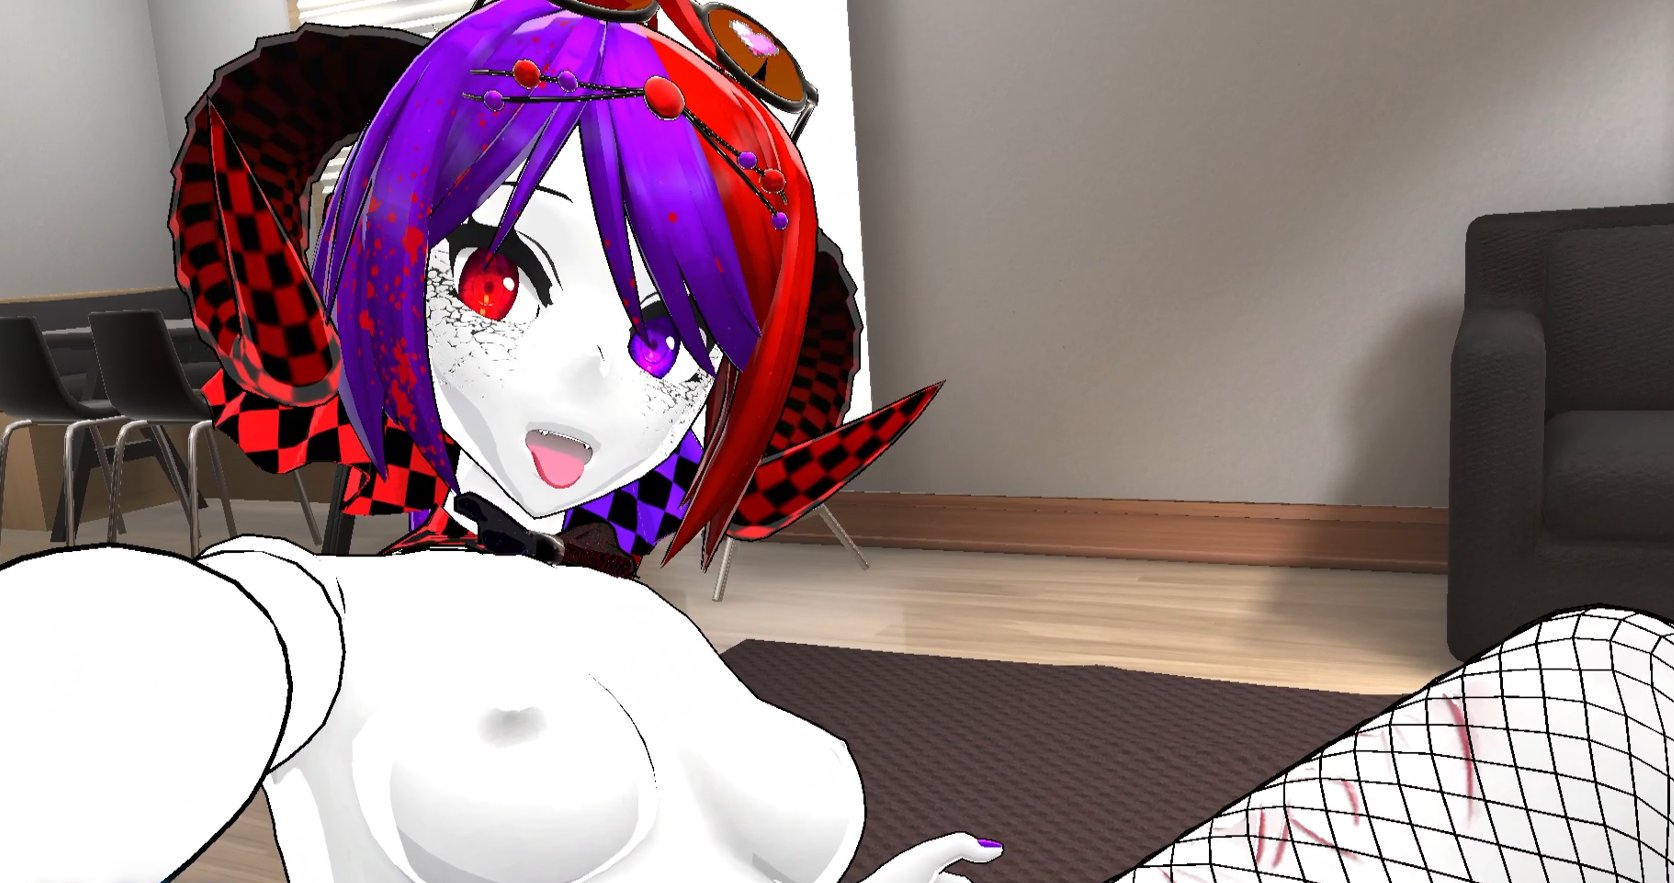 virtual youtuber, vrchat, 3d, tagme, virtual reality, 1girls, 3d model, arms, athletic, athletic female, bangs, bow, bowtie, breasts, breasts out, circular glasses, collar, couch, cowlick, cracked skin, demon, demon girl, demon horns, demon humanoid, demoness, devil, female, female demon, female focus, female human, female nudity, female only, female submissive, fingers, fishnet, fishnet legwear, fishnet pantyhose, fishnet stockings, fishnet thighhighs, fishnets, fit, fit female, functionally nude, girl, glasses, glowing, glowing eyes, grey body, happy, heart glasses, horns, horny, horny female, human, human focus, humanoid, legwear, legwear only, light, light-skinned female, light skin, long hair, looking at viewer, mature female, mature woman, messy, messy hair, mostly nude, multicolored hair, naked, naked female, nipples, no bra, no panties, no pants, no shoes, no underwear, nude, nude female, pale skin, practically nude, presenting, purple eyes, purple hair, pussy, red eyes, red hair, selfie, skinny, solo, solo female, solo focus, stockings, submissive, submissive and breedable, submissive female, submissive human, succubus, thighs, tits out, tongue, tongue out, two tone hair, undressed, vrchat avatar, vrchat media, vrchat model, vtuber, white body, white female, white girl, white sclera, white skin, white woman, 